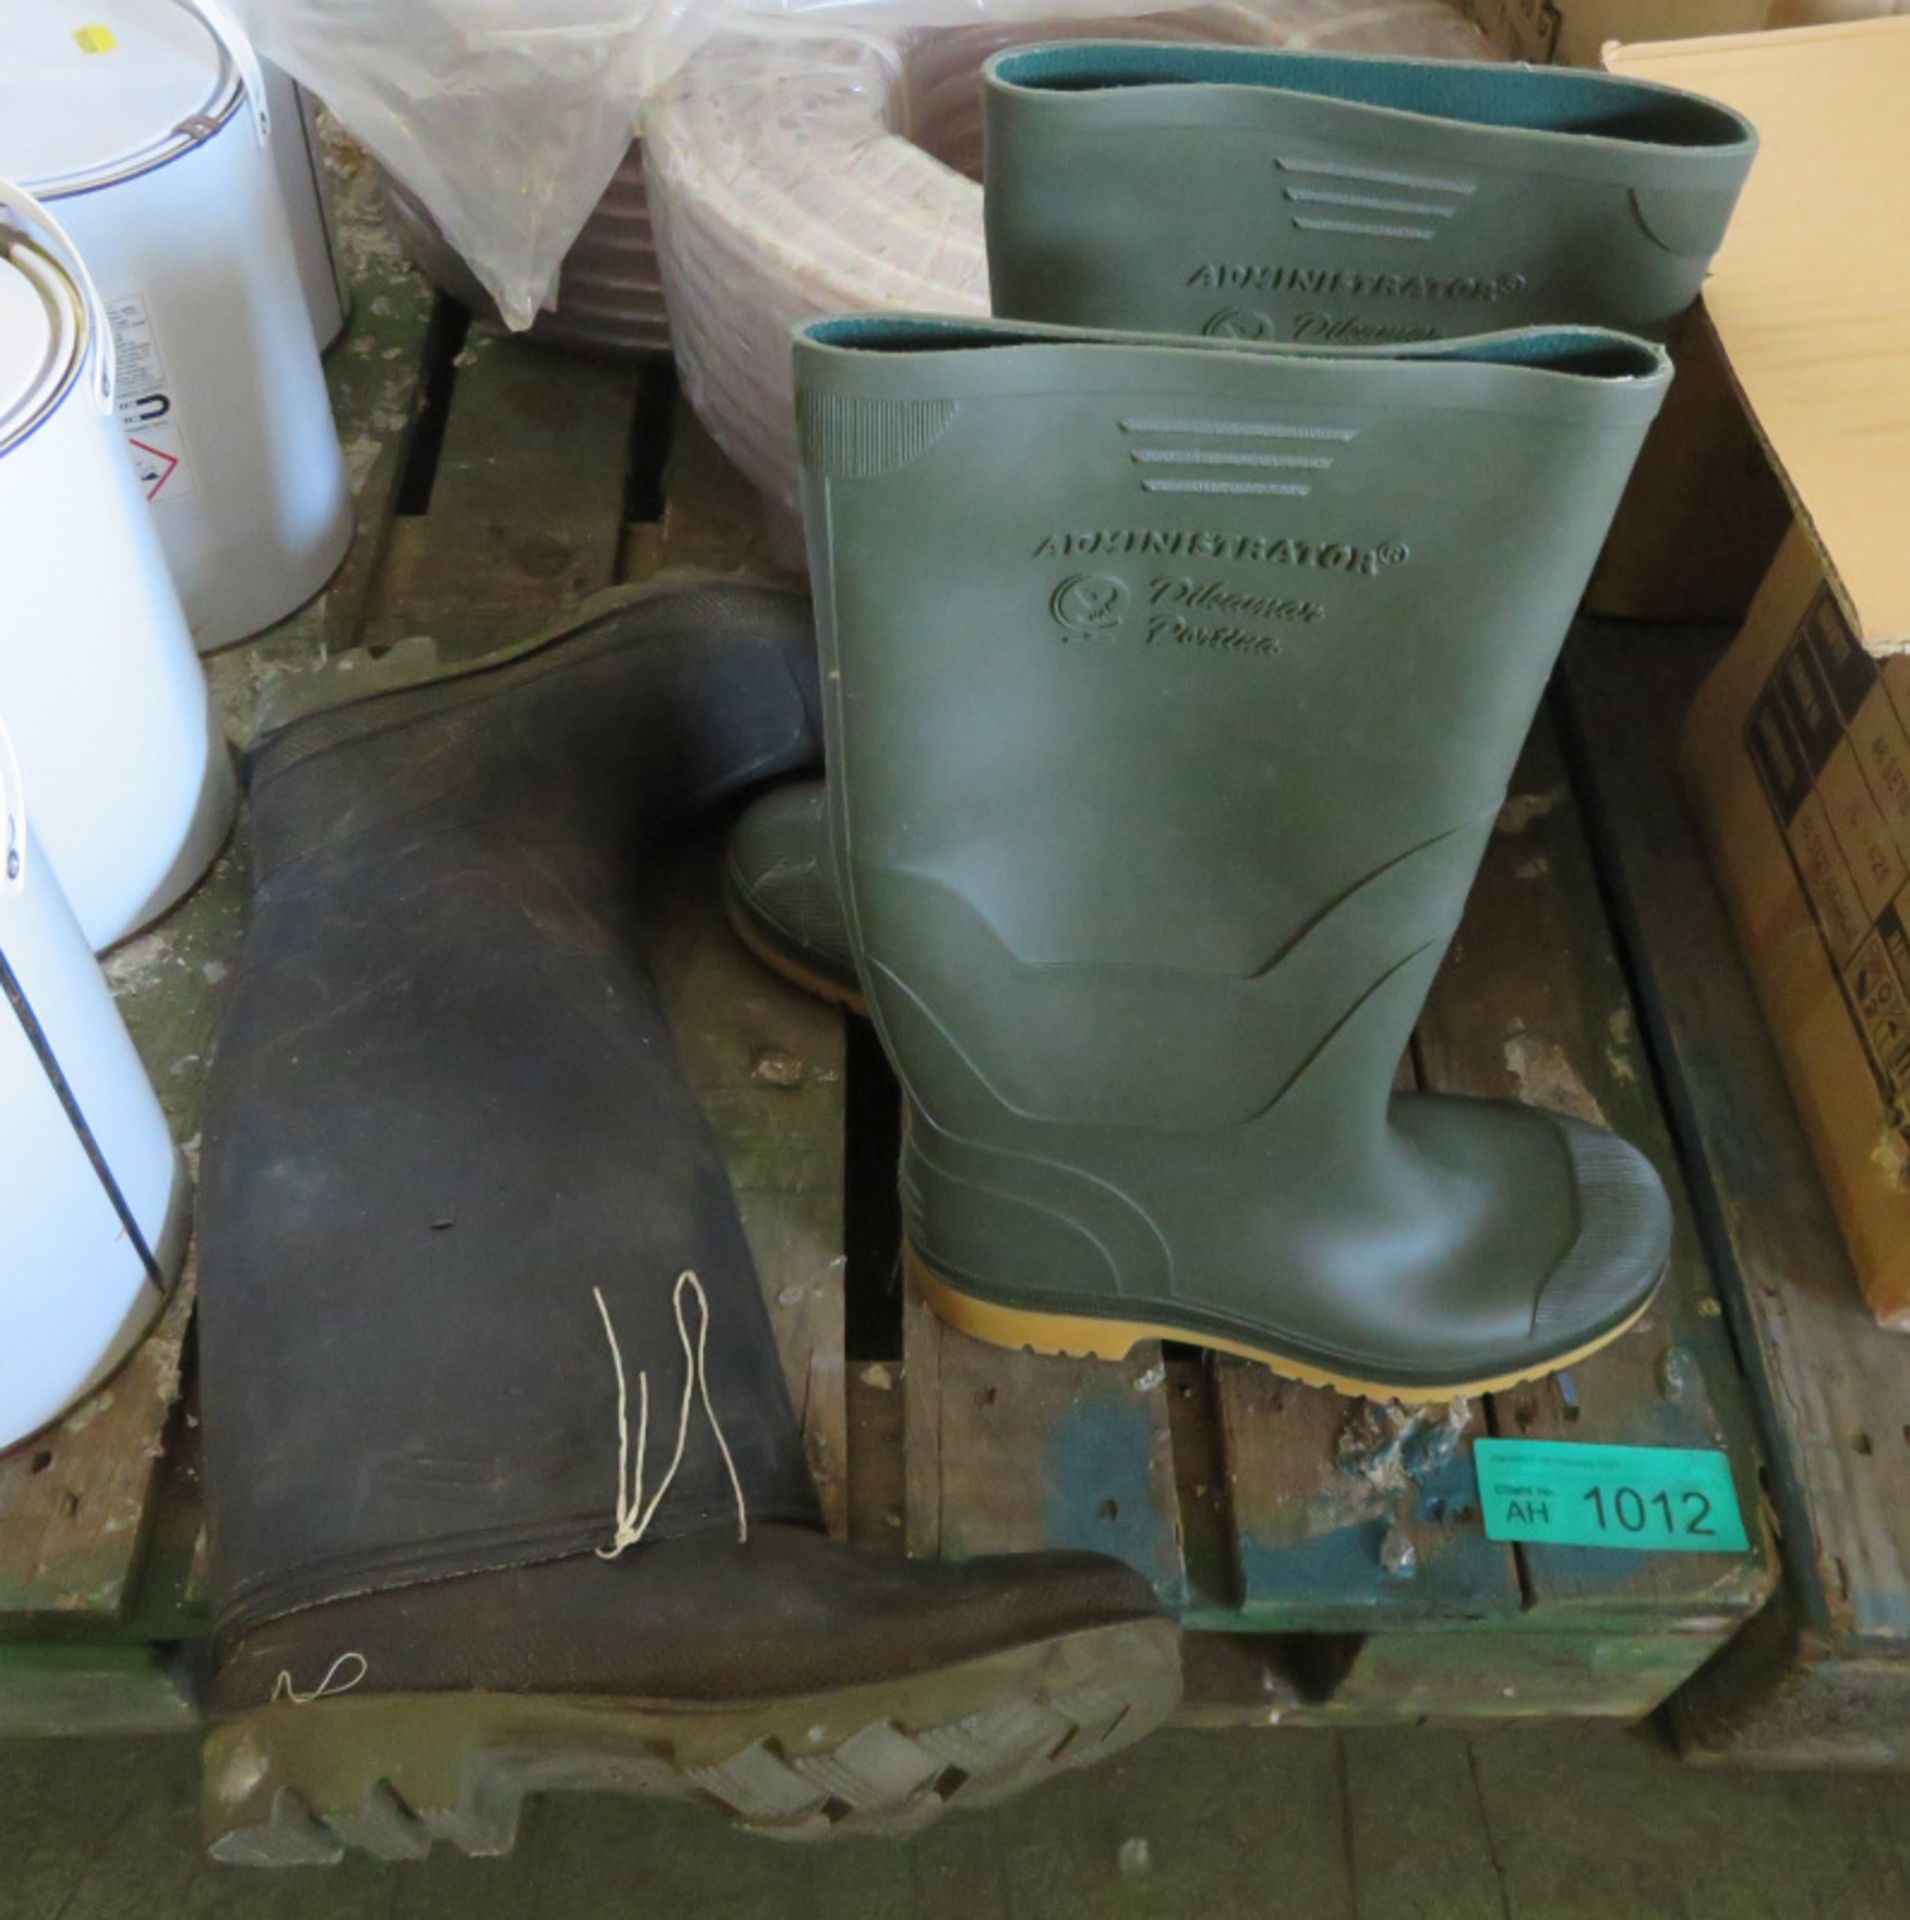 2 pairs of wellington boots - size 7